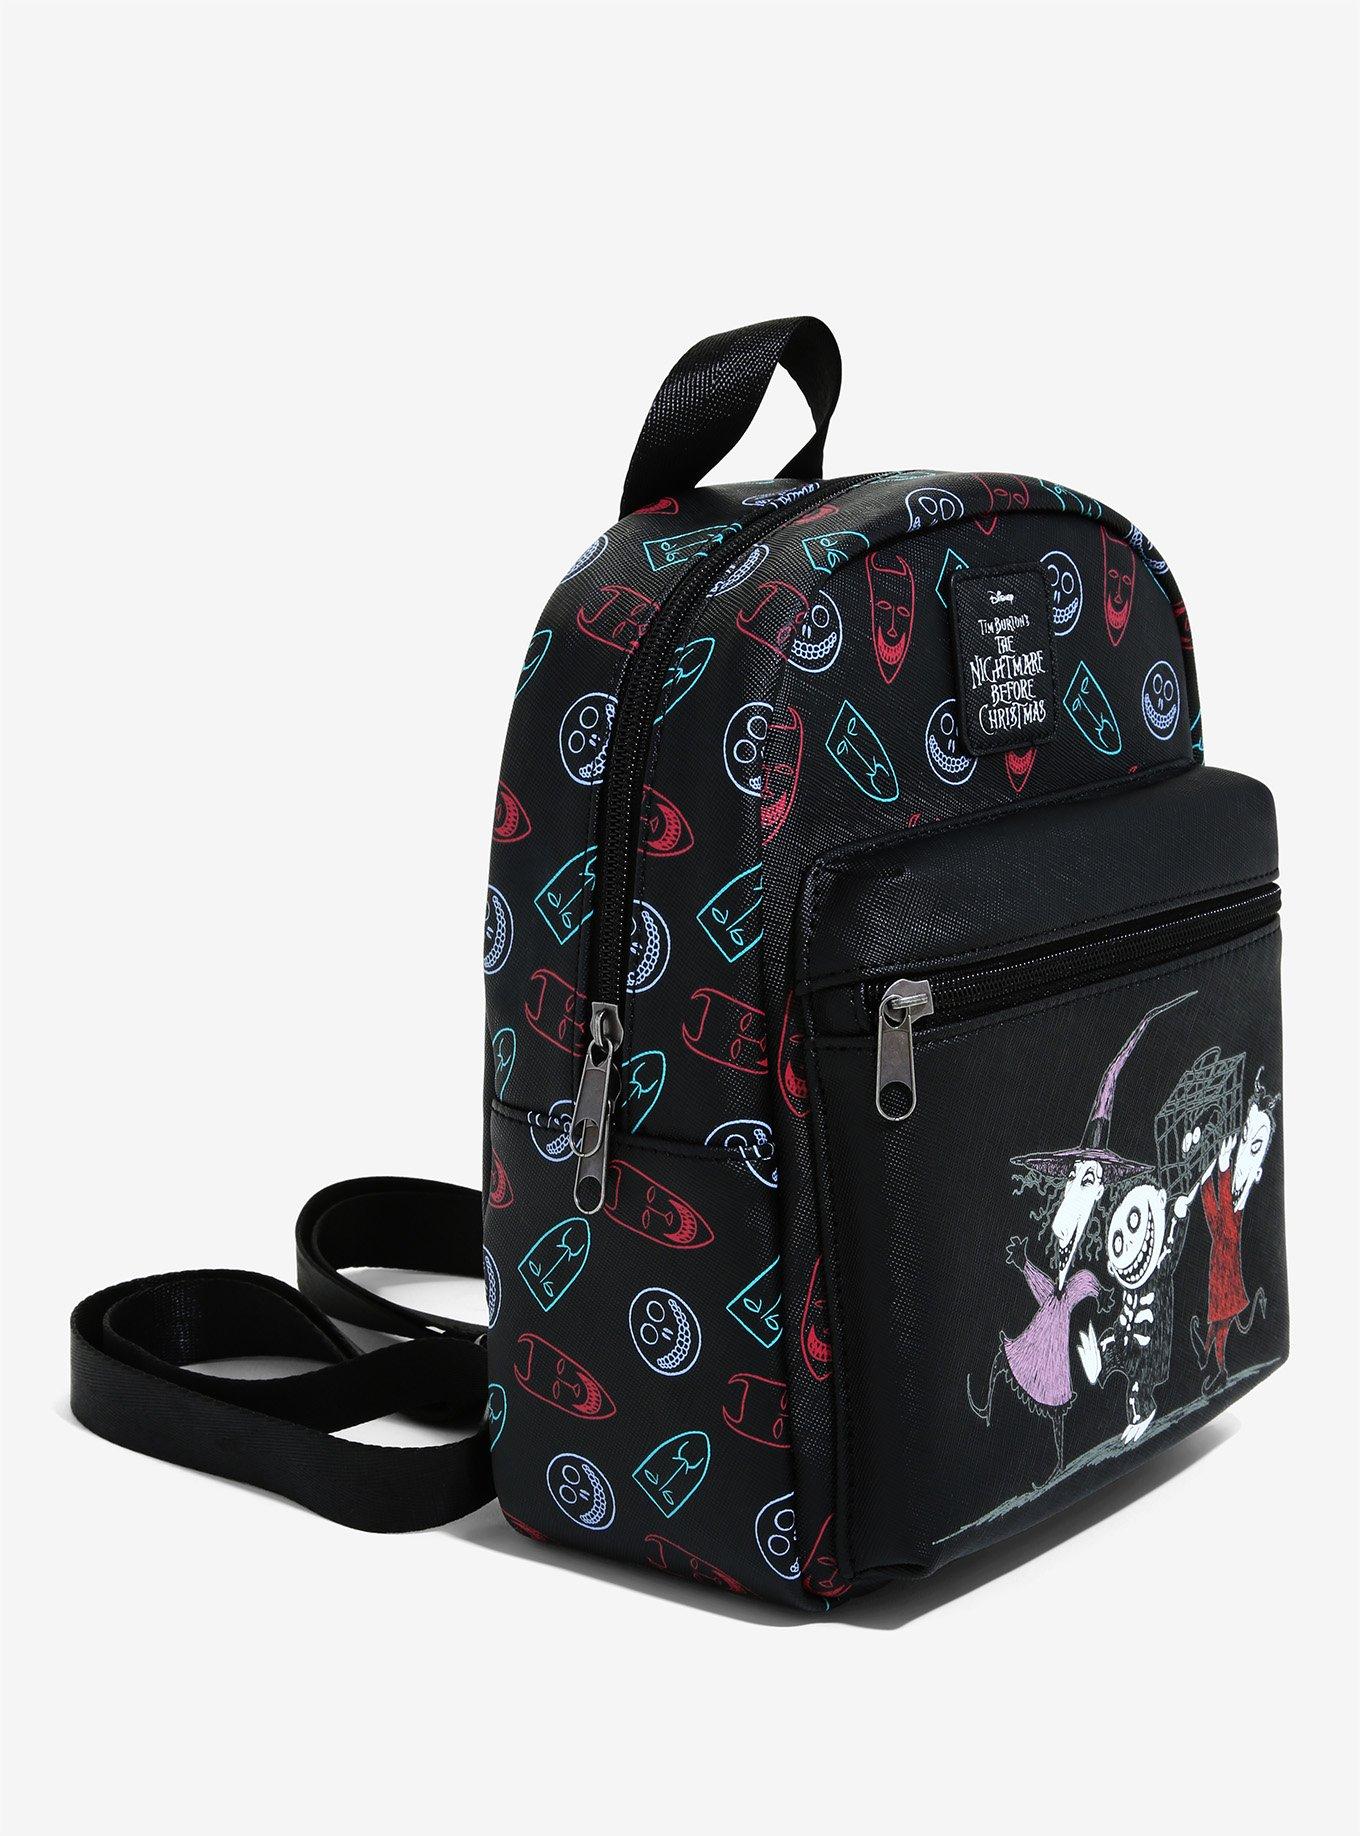 Lock, Shock and Barrel Backpack for Sale by blacksnowcomics